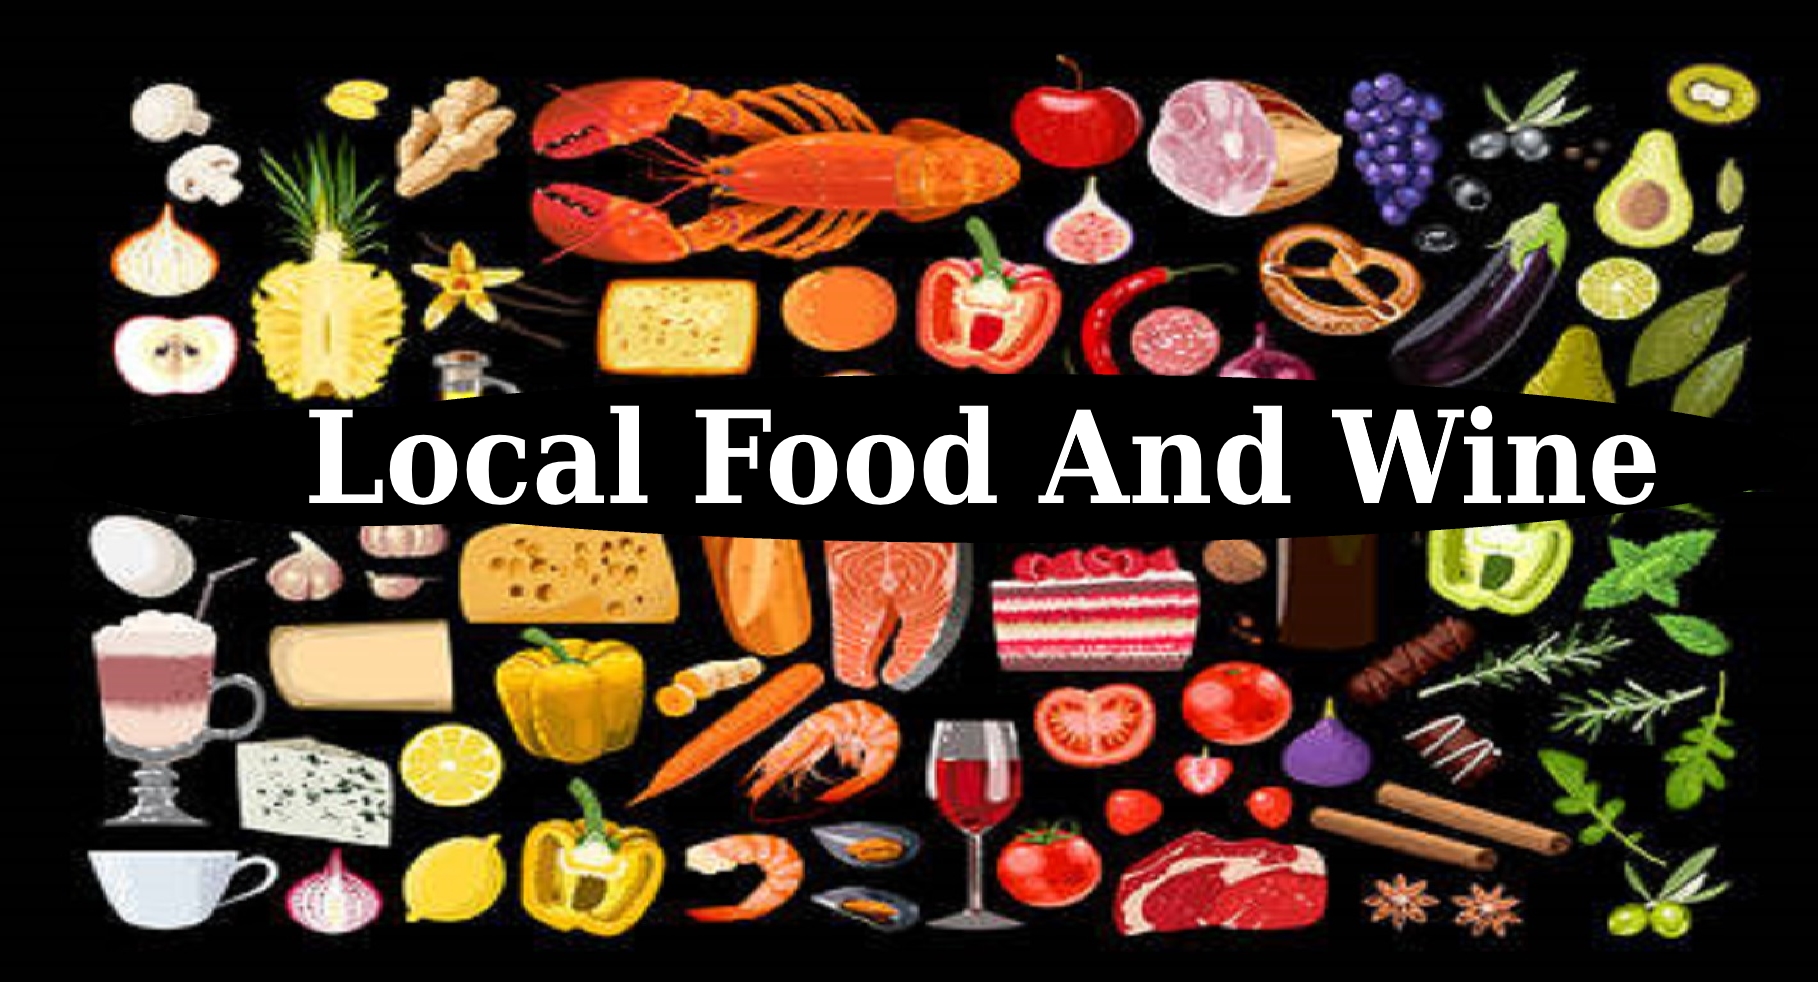 Local Food And Wine logo